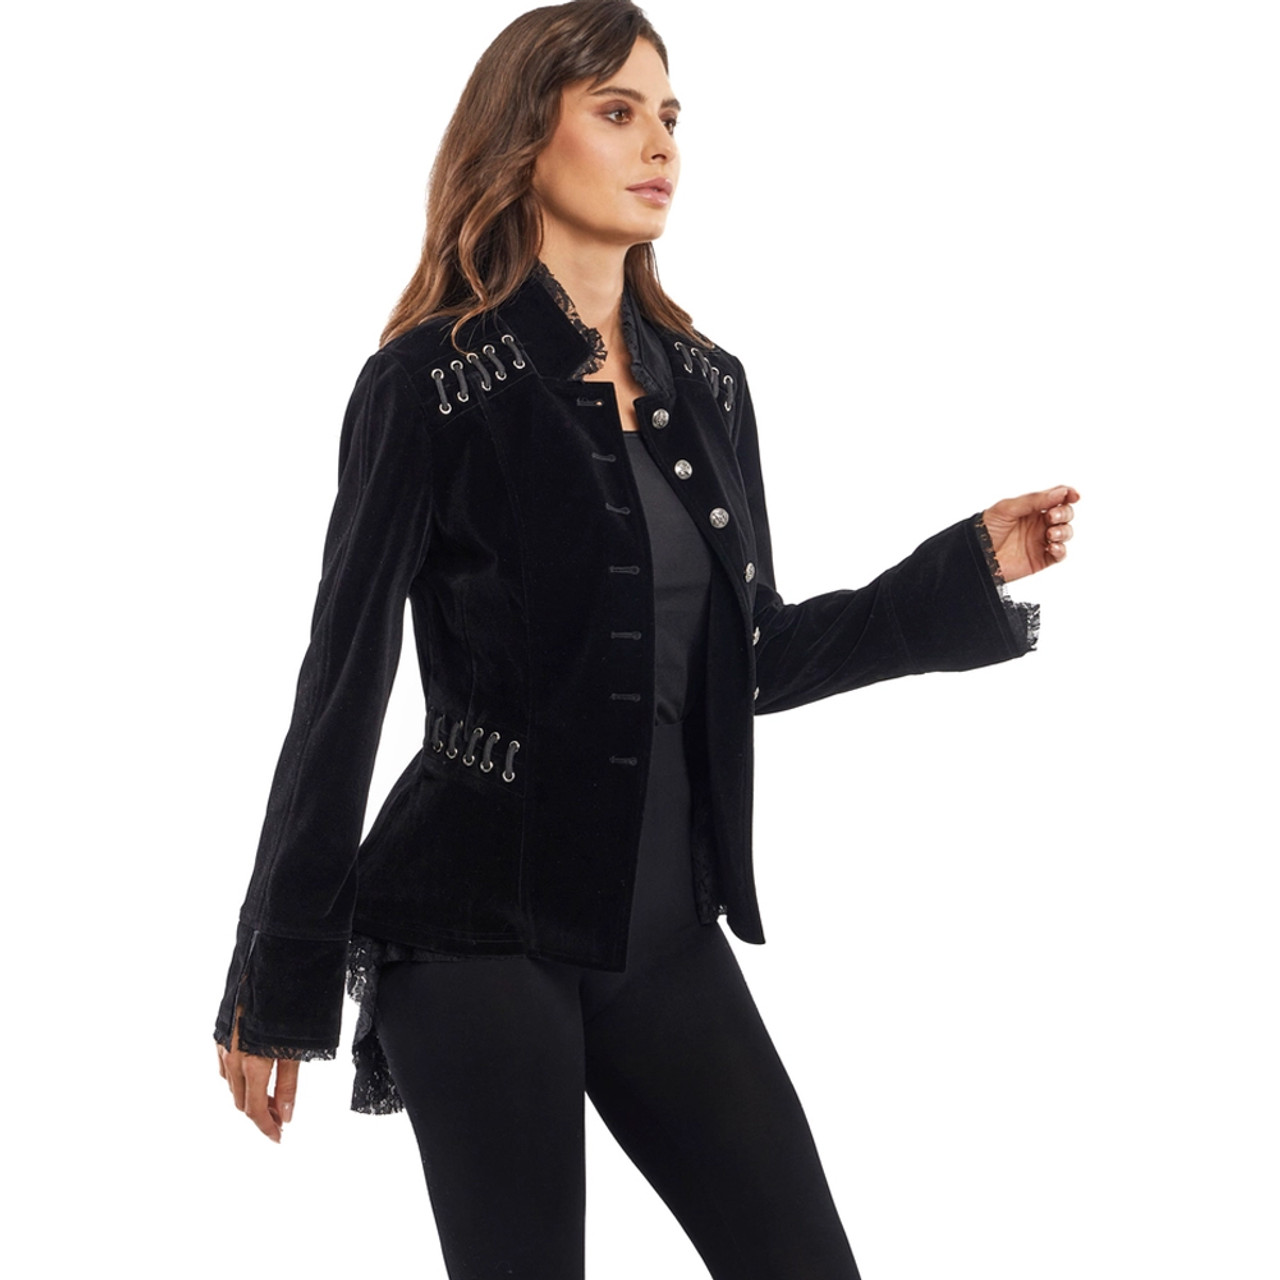 Black Velvet and Lace STeampunk Military Style Jacket